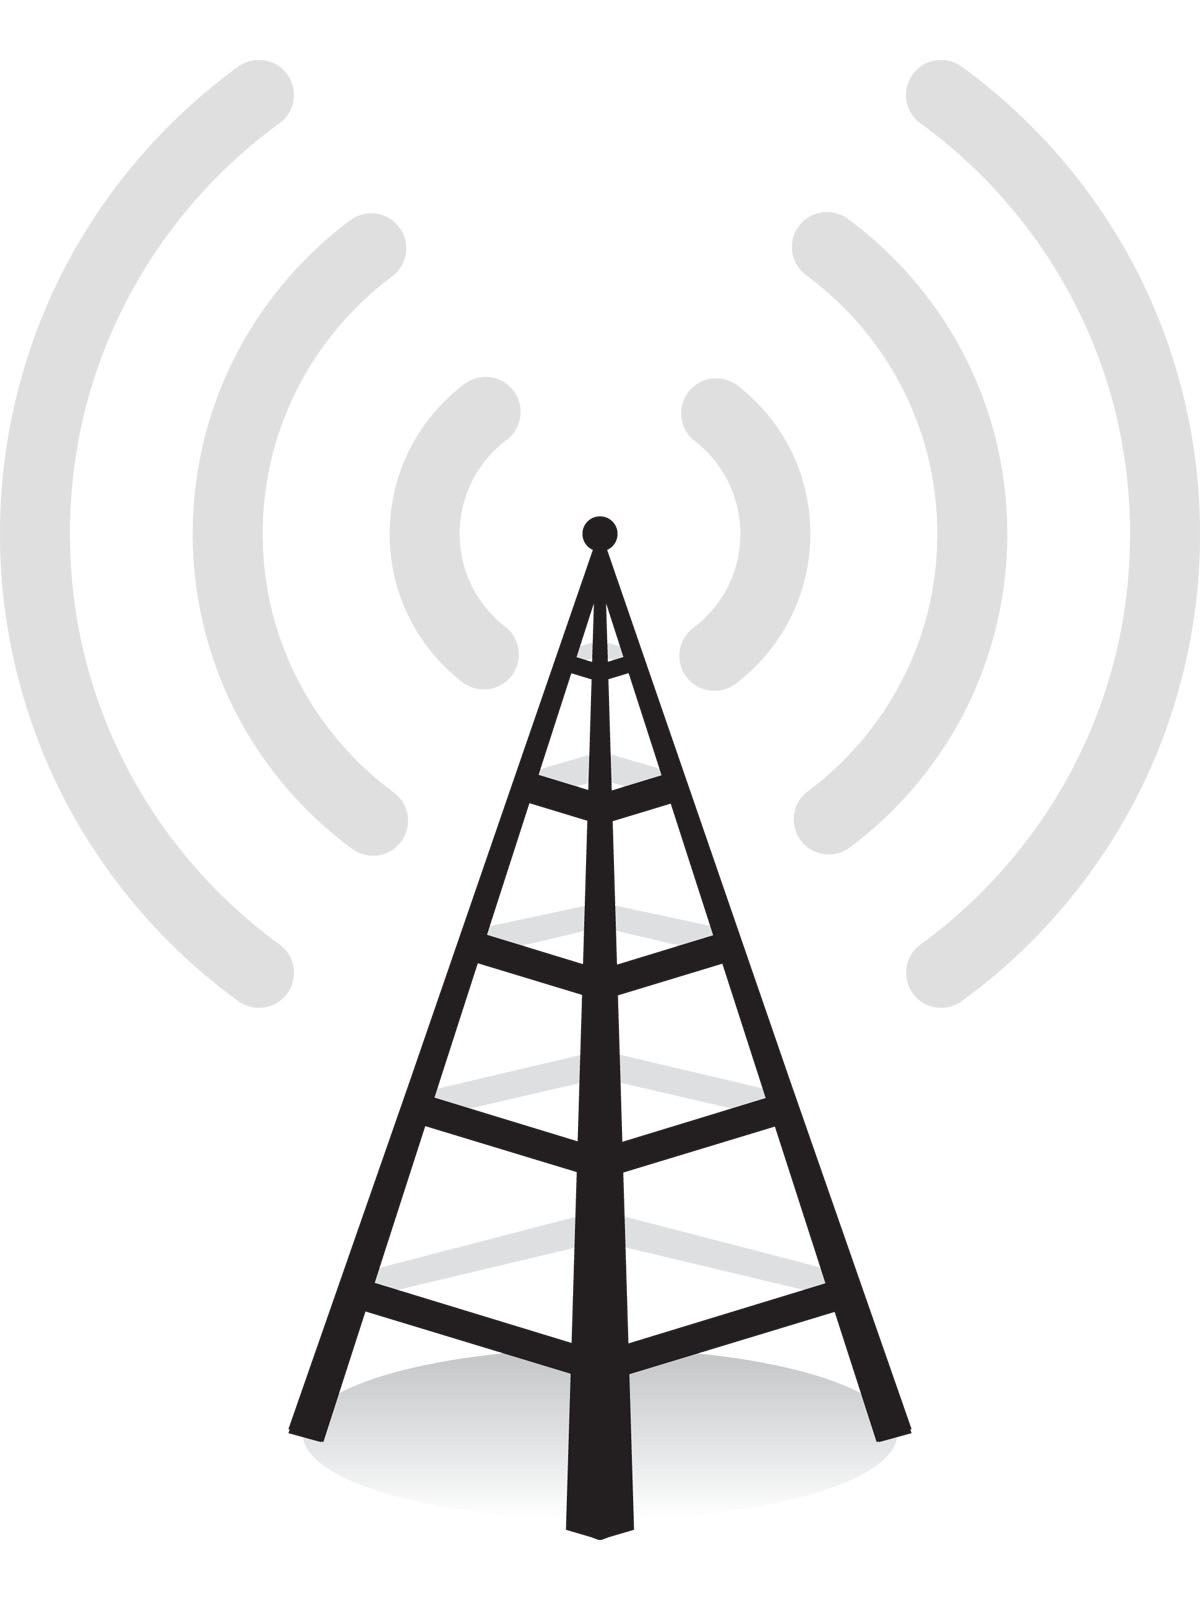 Cell phone tower clipart